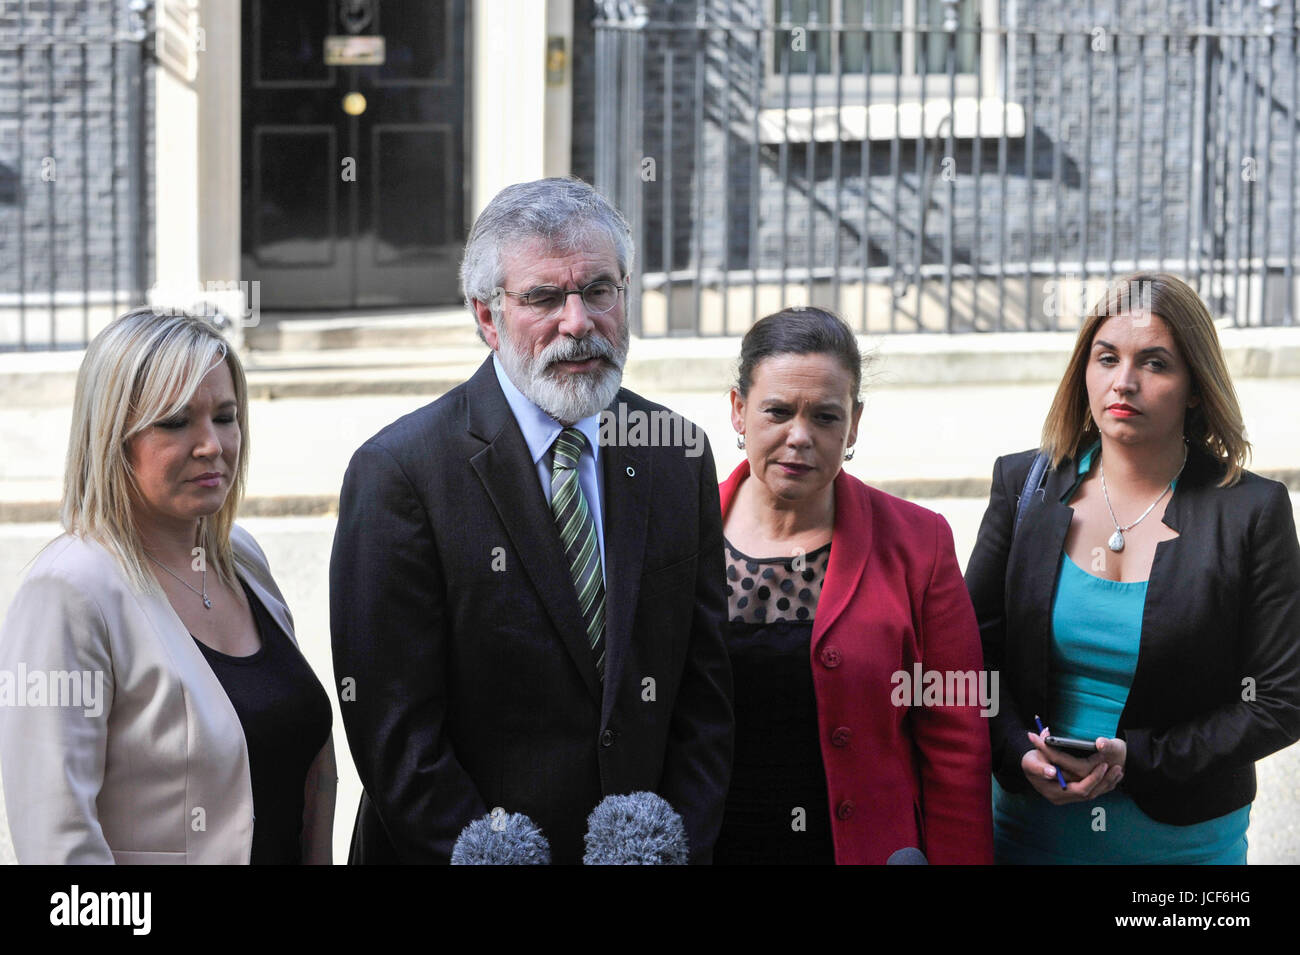 London, UK. 15th June, 2017. (L to R) Michelle O'Neill, leader of Sinn Féin, Gerry Adams, President, Mary Lou McDonald and Elisha McCallion give a press conference outside Number 10. Members of the Northern Ireland Assembly visit Downing Street for talks with Prime Minister Theresa May following the results of the General Election. The Conservatives are seeking to work with the Democratic Unionist Party in order to form a minority government. Credit: Stephen Chung/Alamy Live News Stock Photo